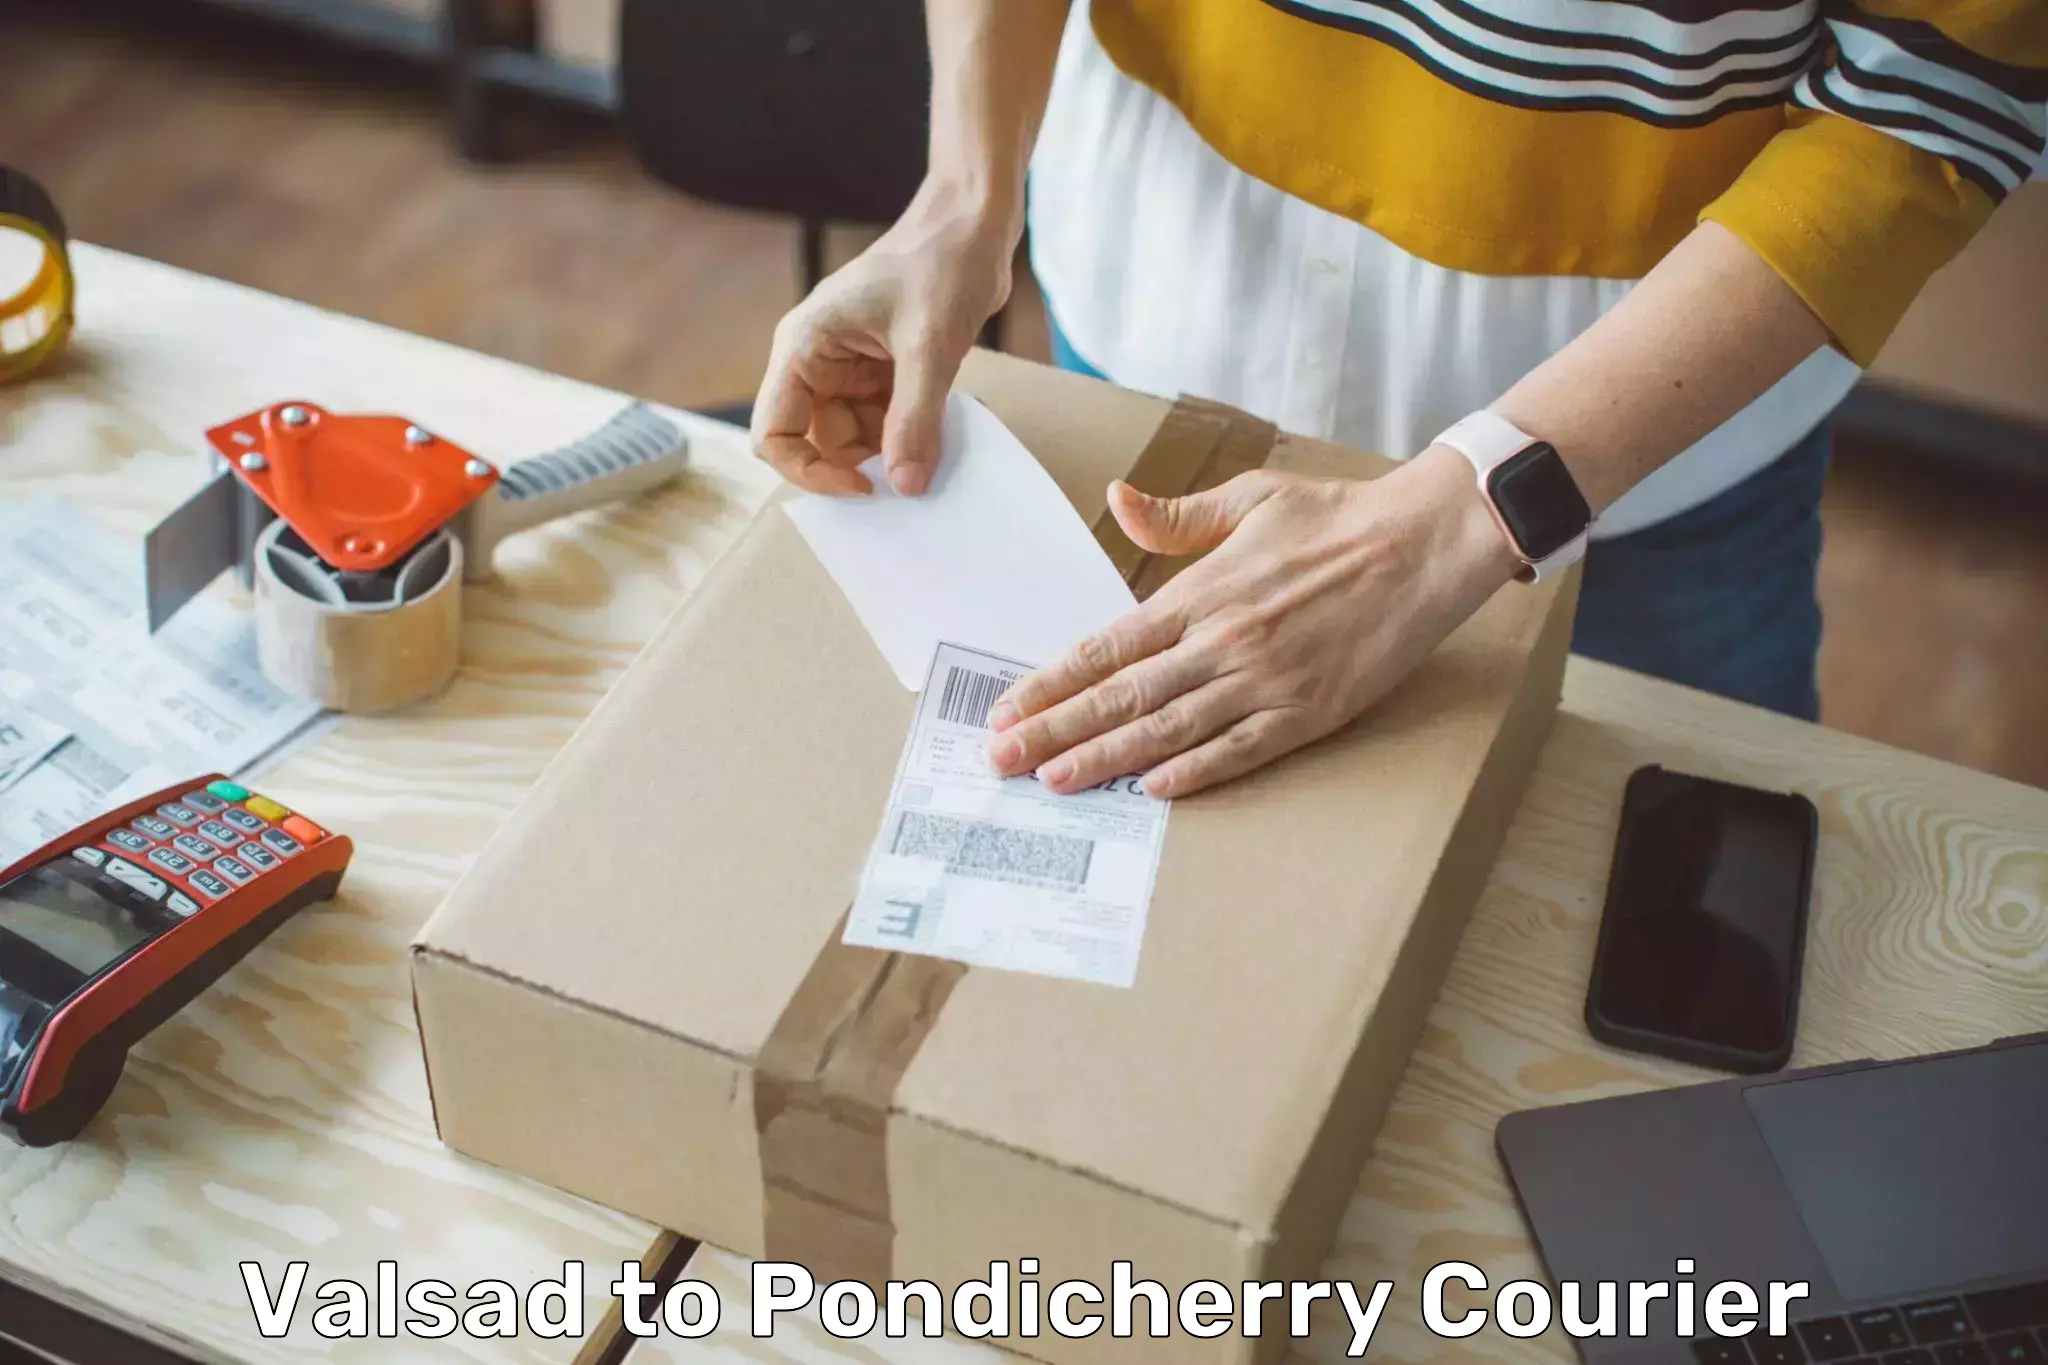 Parcel handling and care in Valsad to Pondicherry